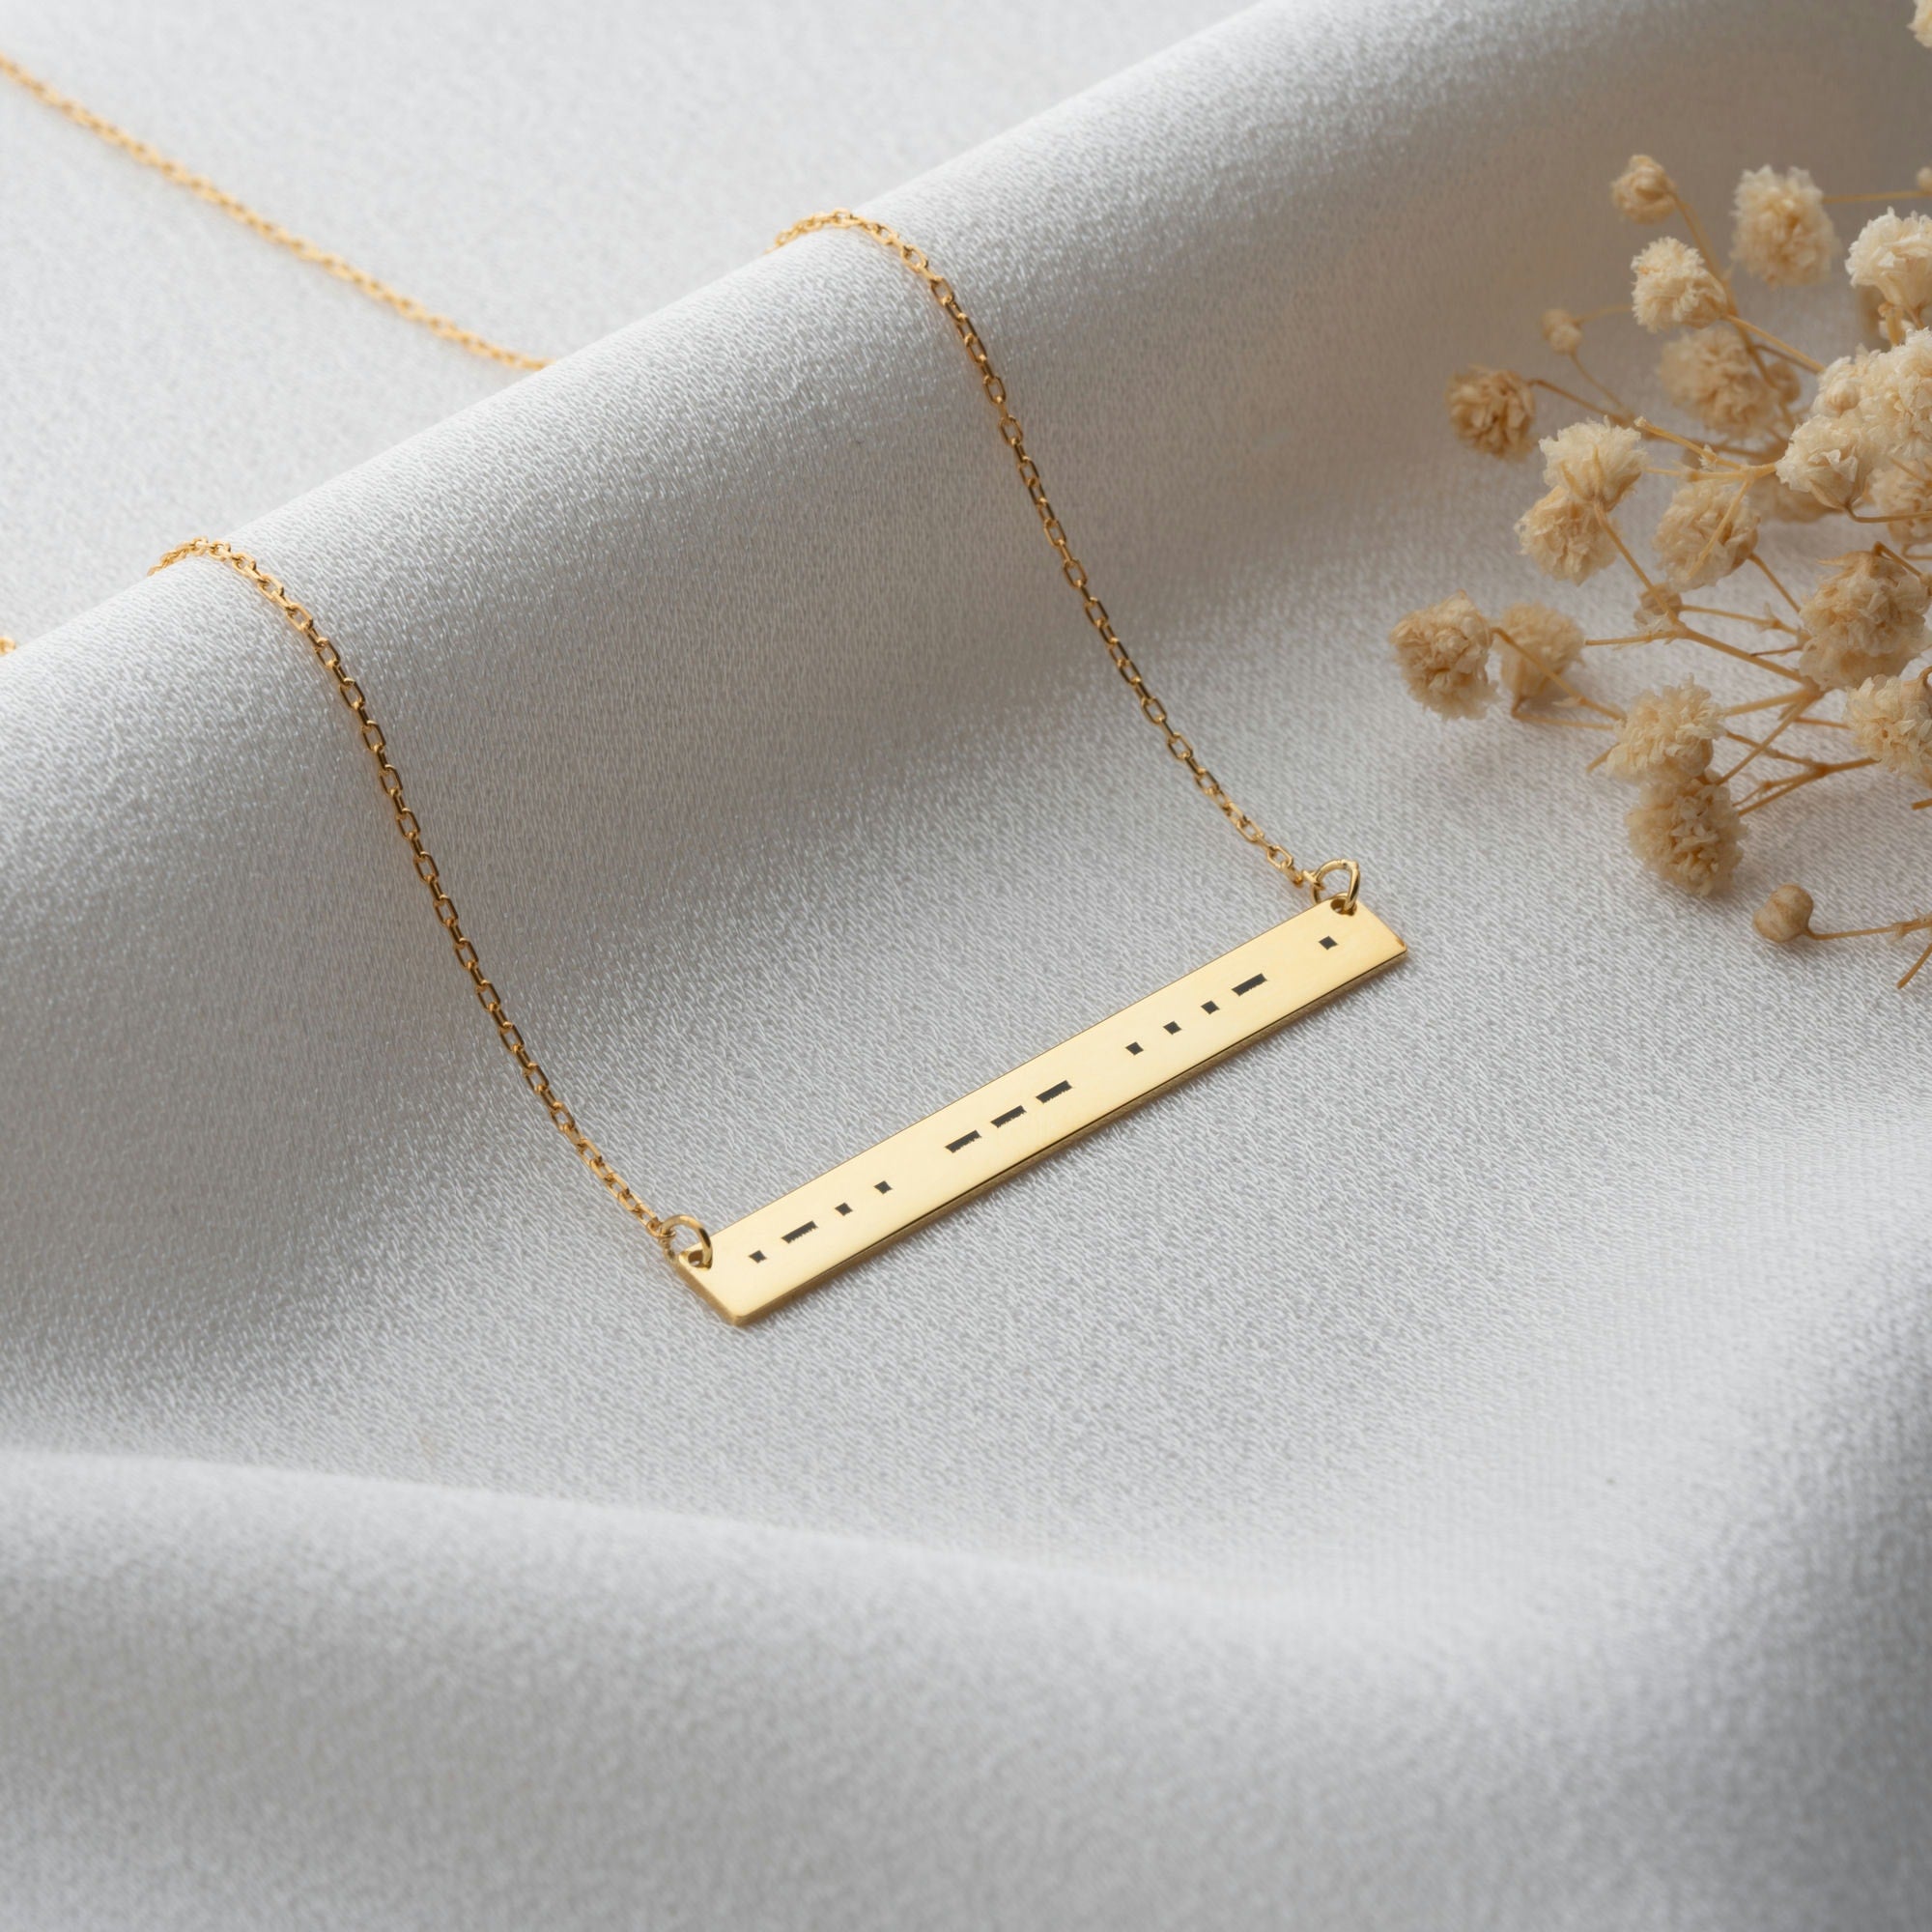 Bar necklace with morse codes